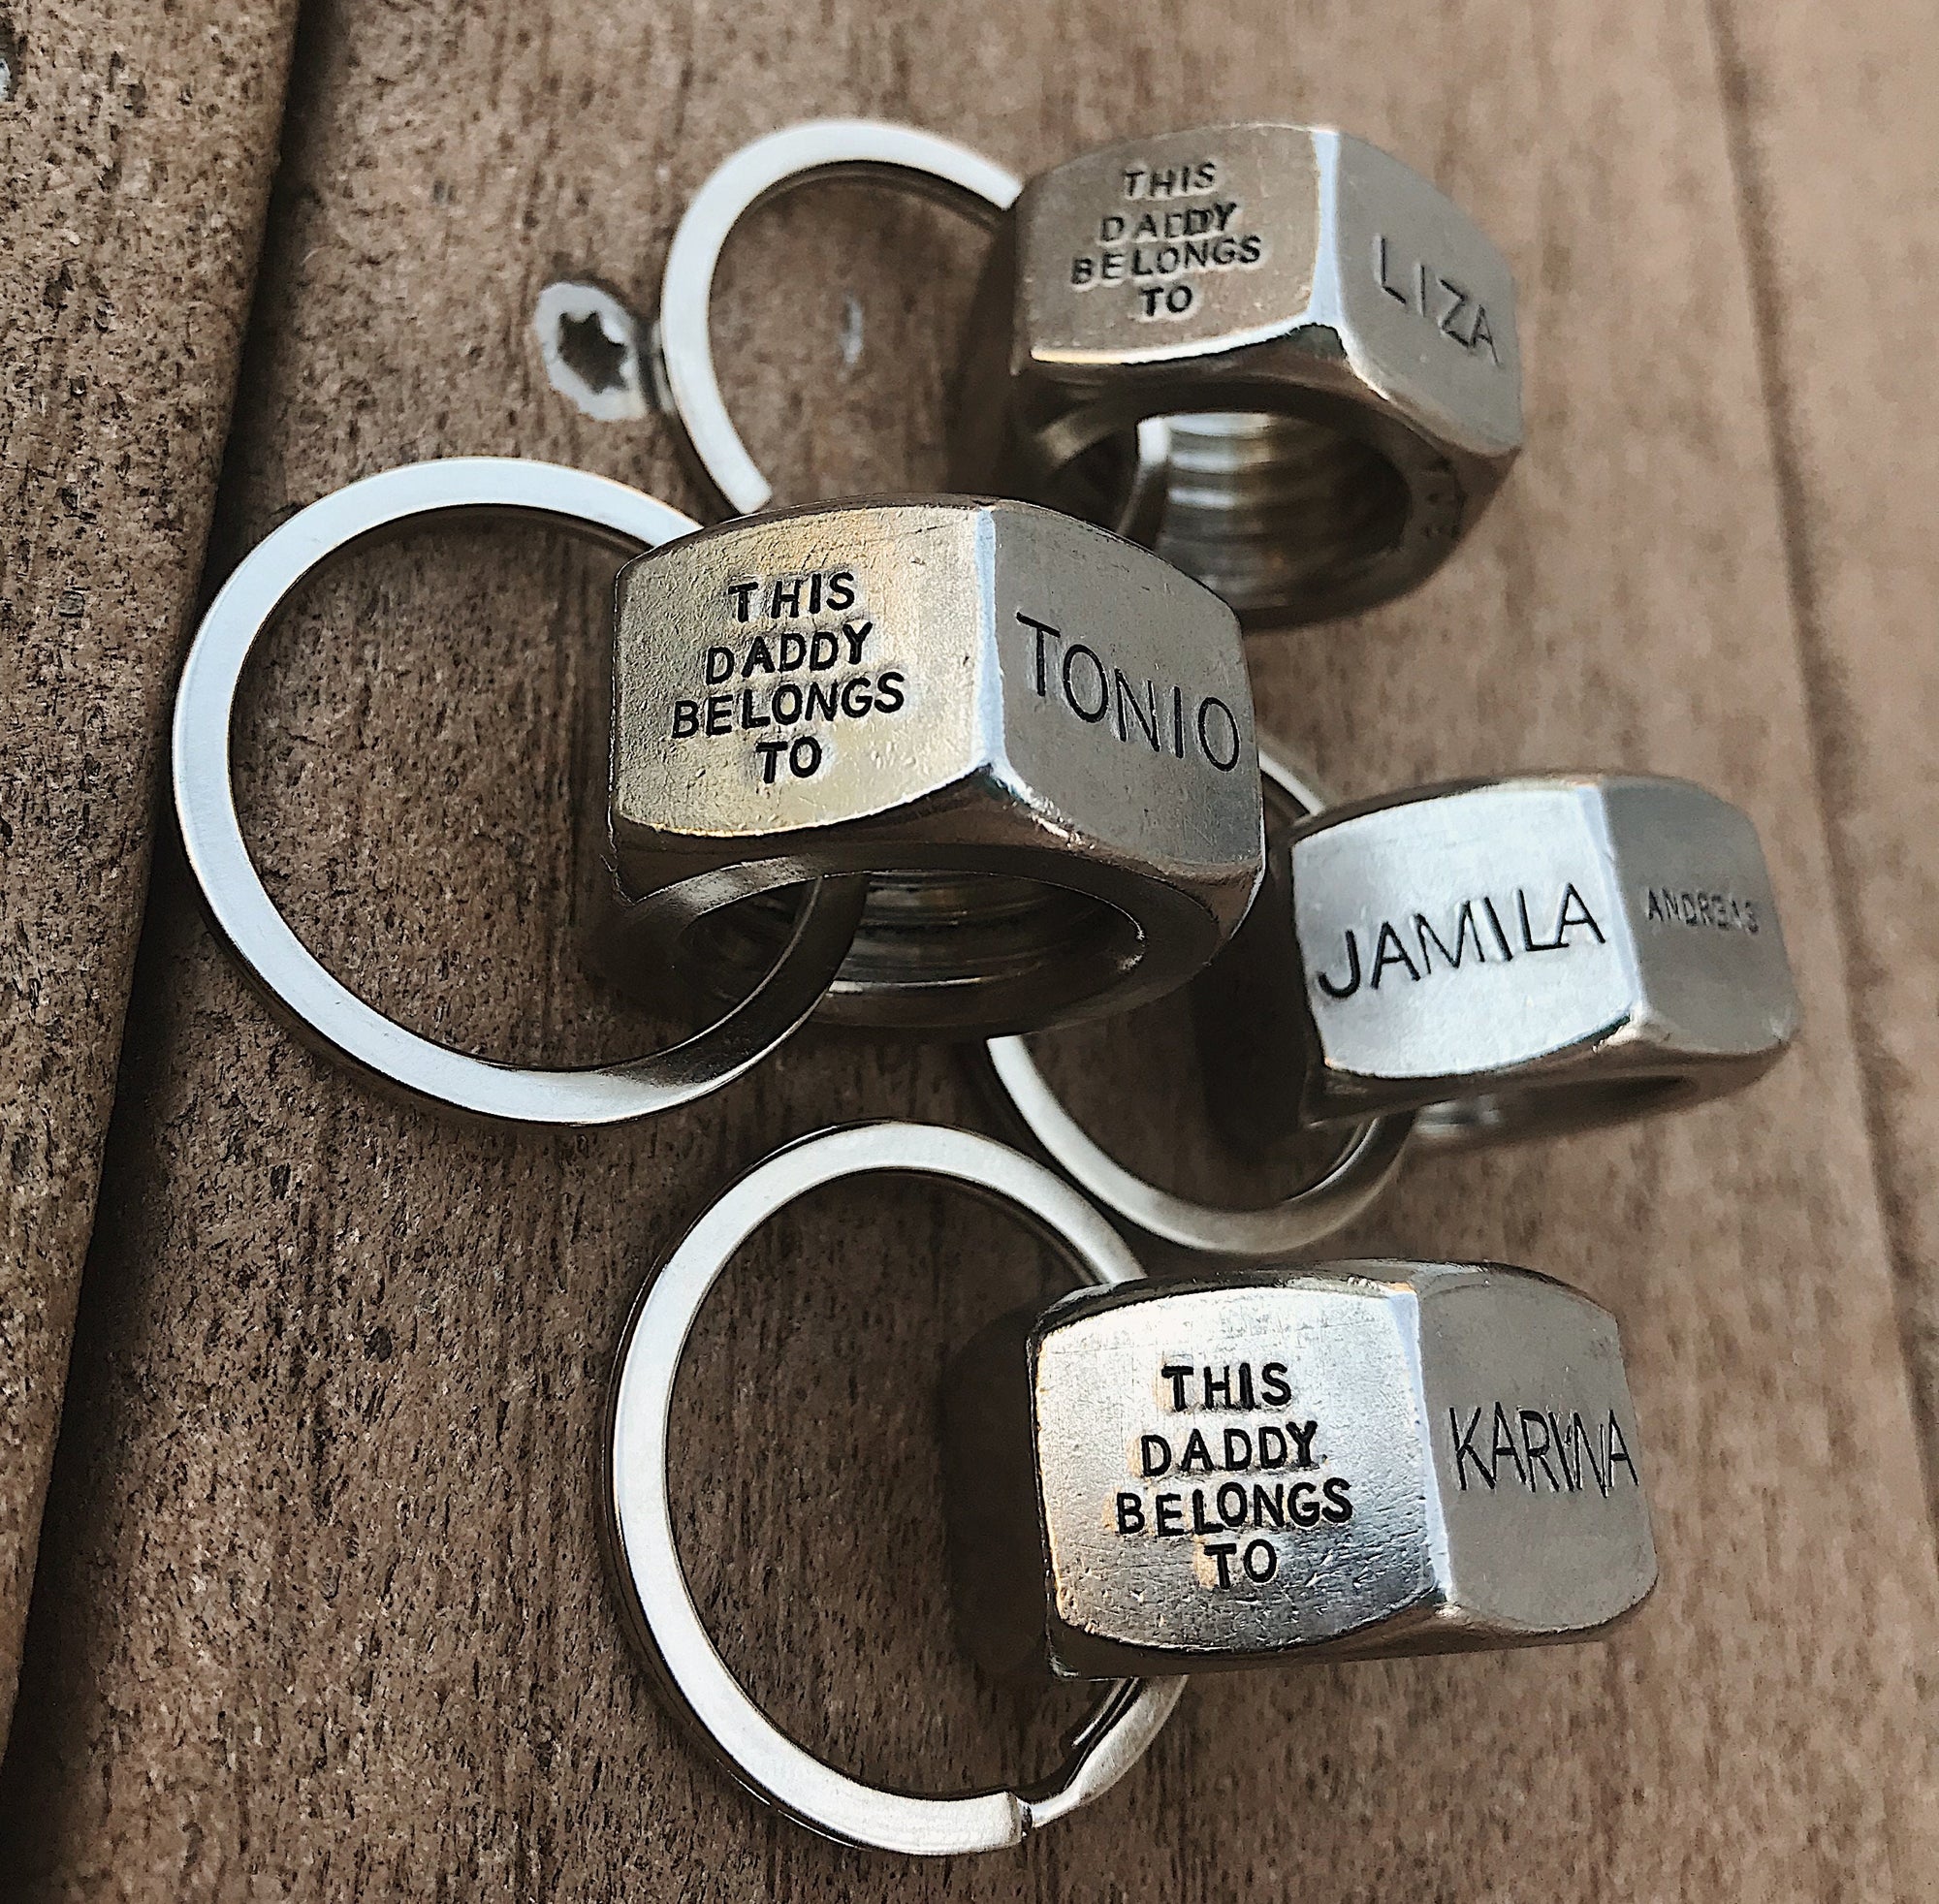 UP TO 5 NAMES: Unique Father's Day Gift | This Daddy Belongs To Keychain | Mens Valentines Gift | First Fathers Day | Kids Name Personalized